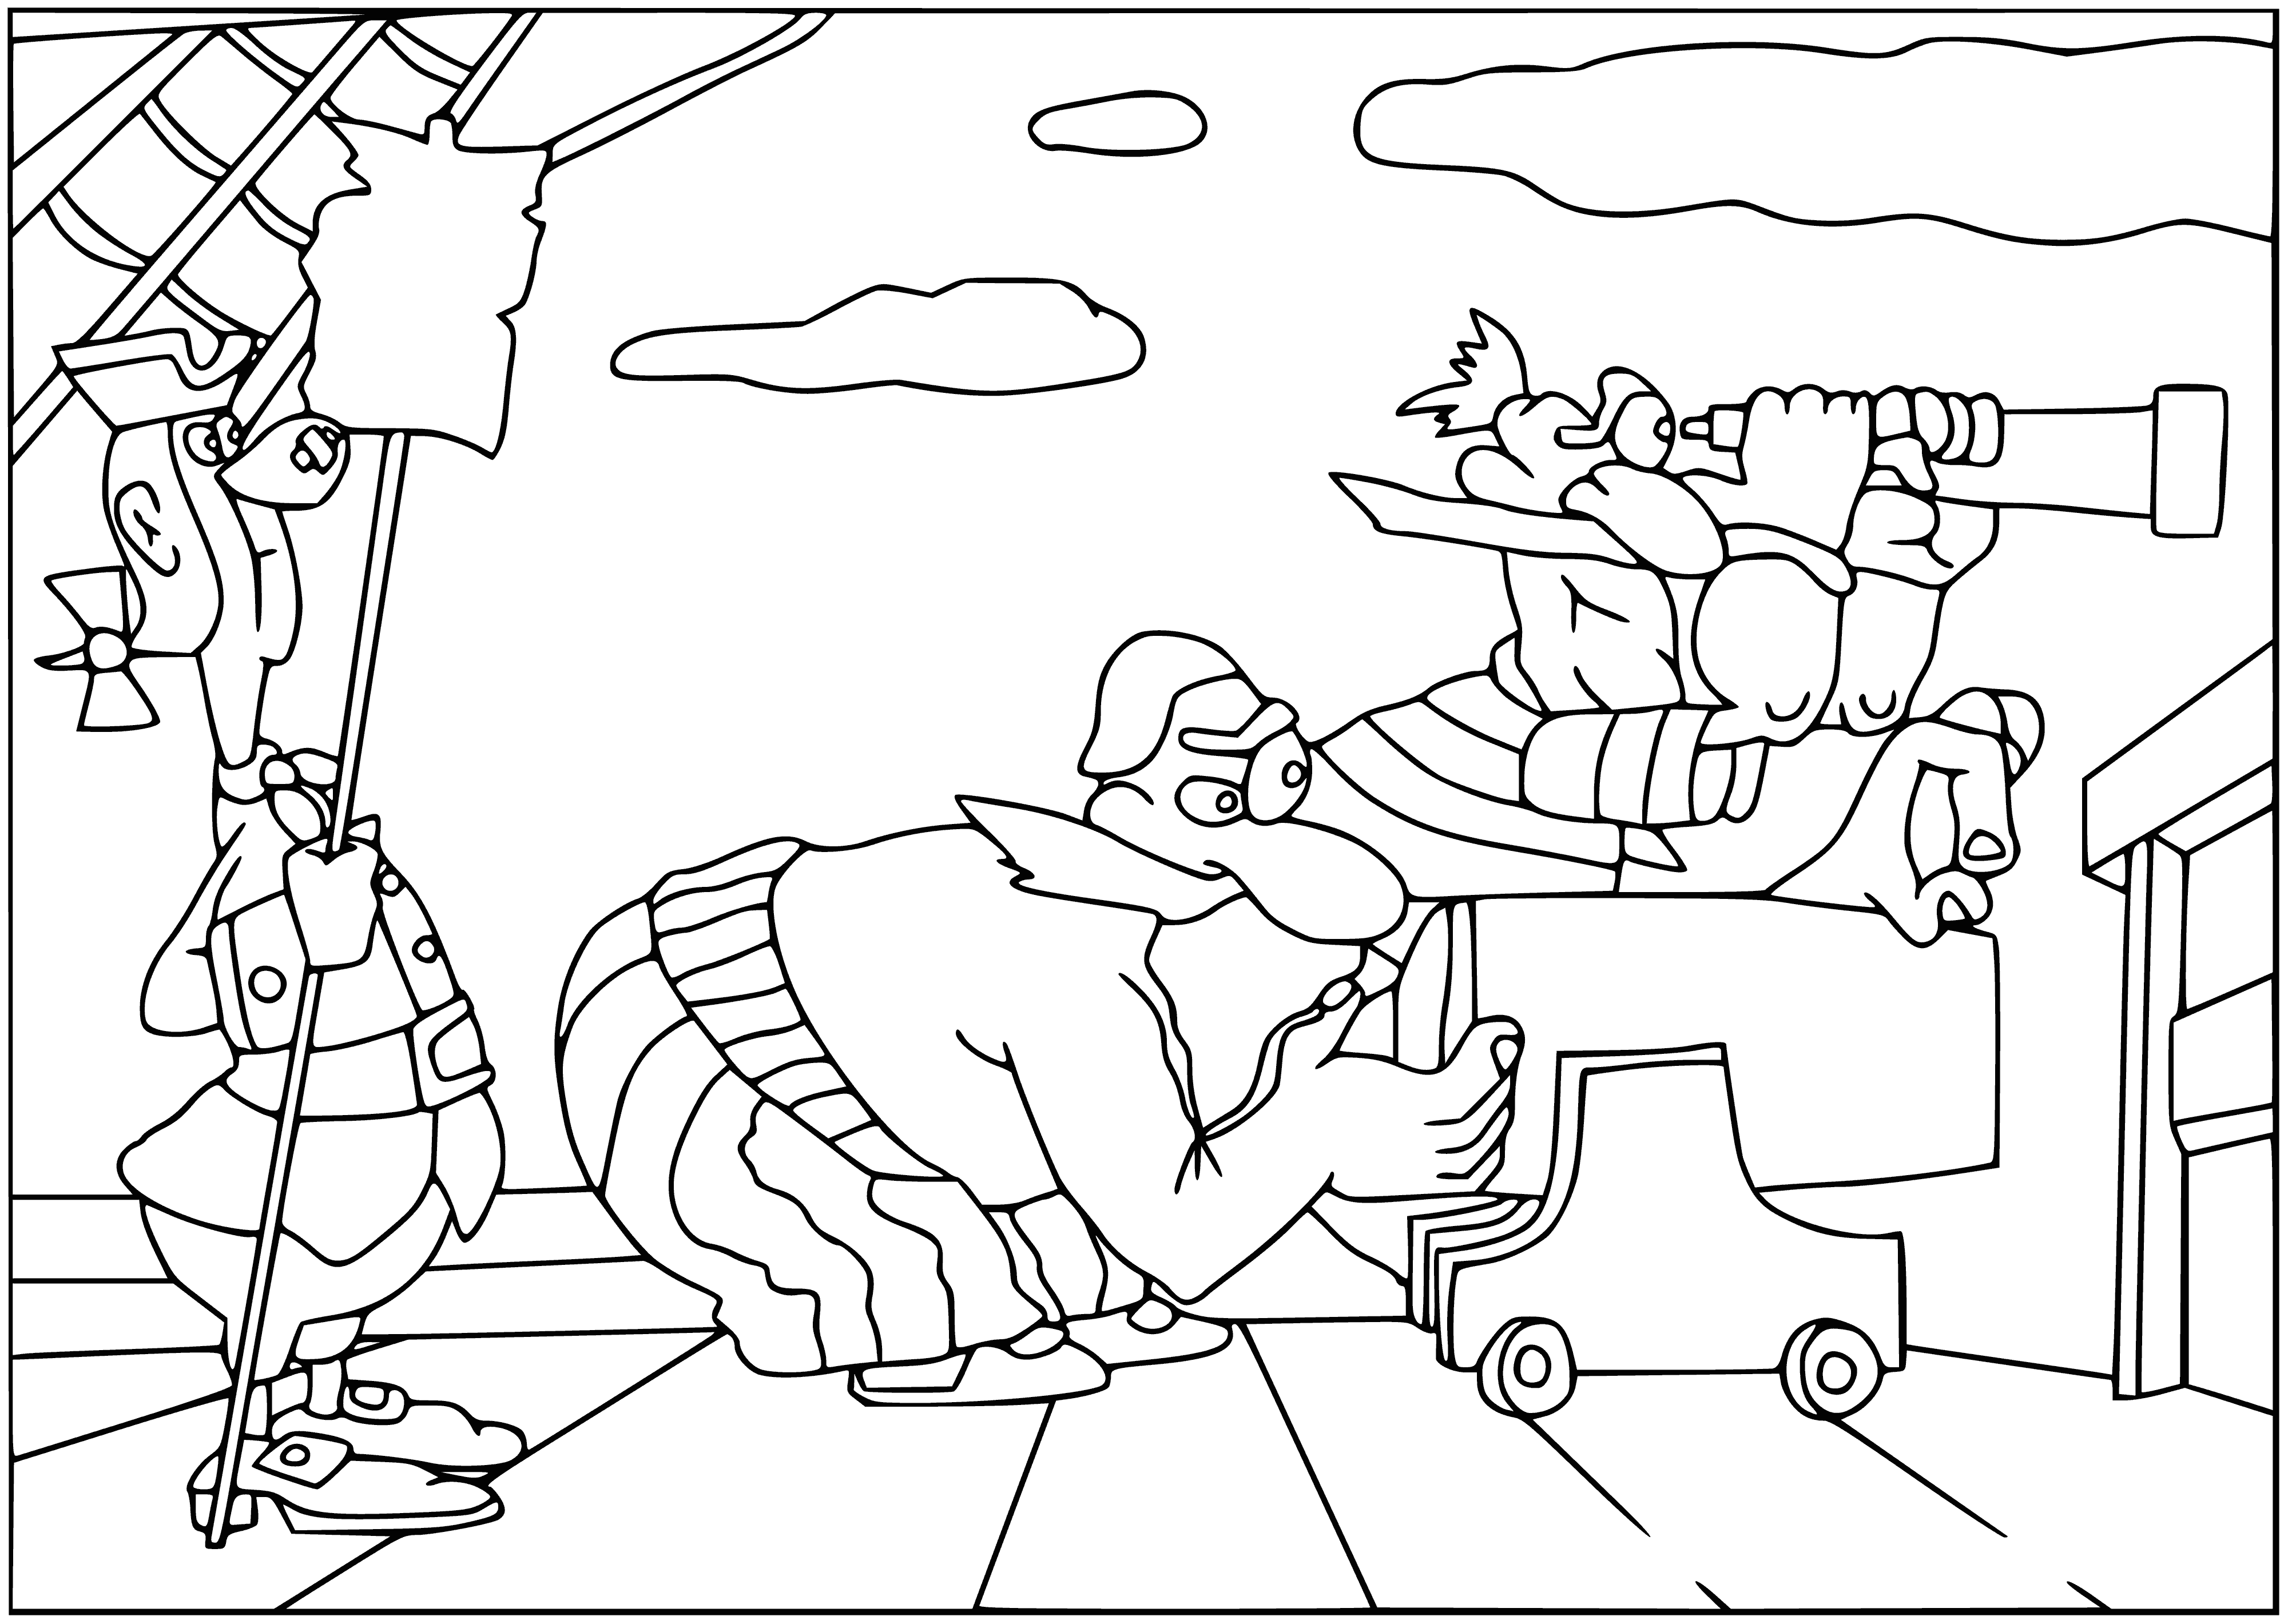 coloring page: Small island holds mysterious wooden structure: pendulum-like weight on large wheel; platform w/ cannon facing sea, stairs & large flag flying.